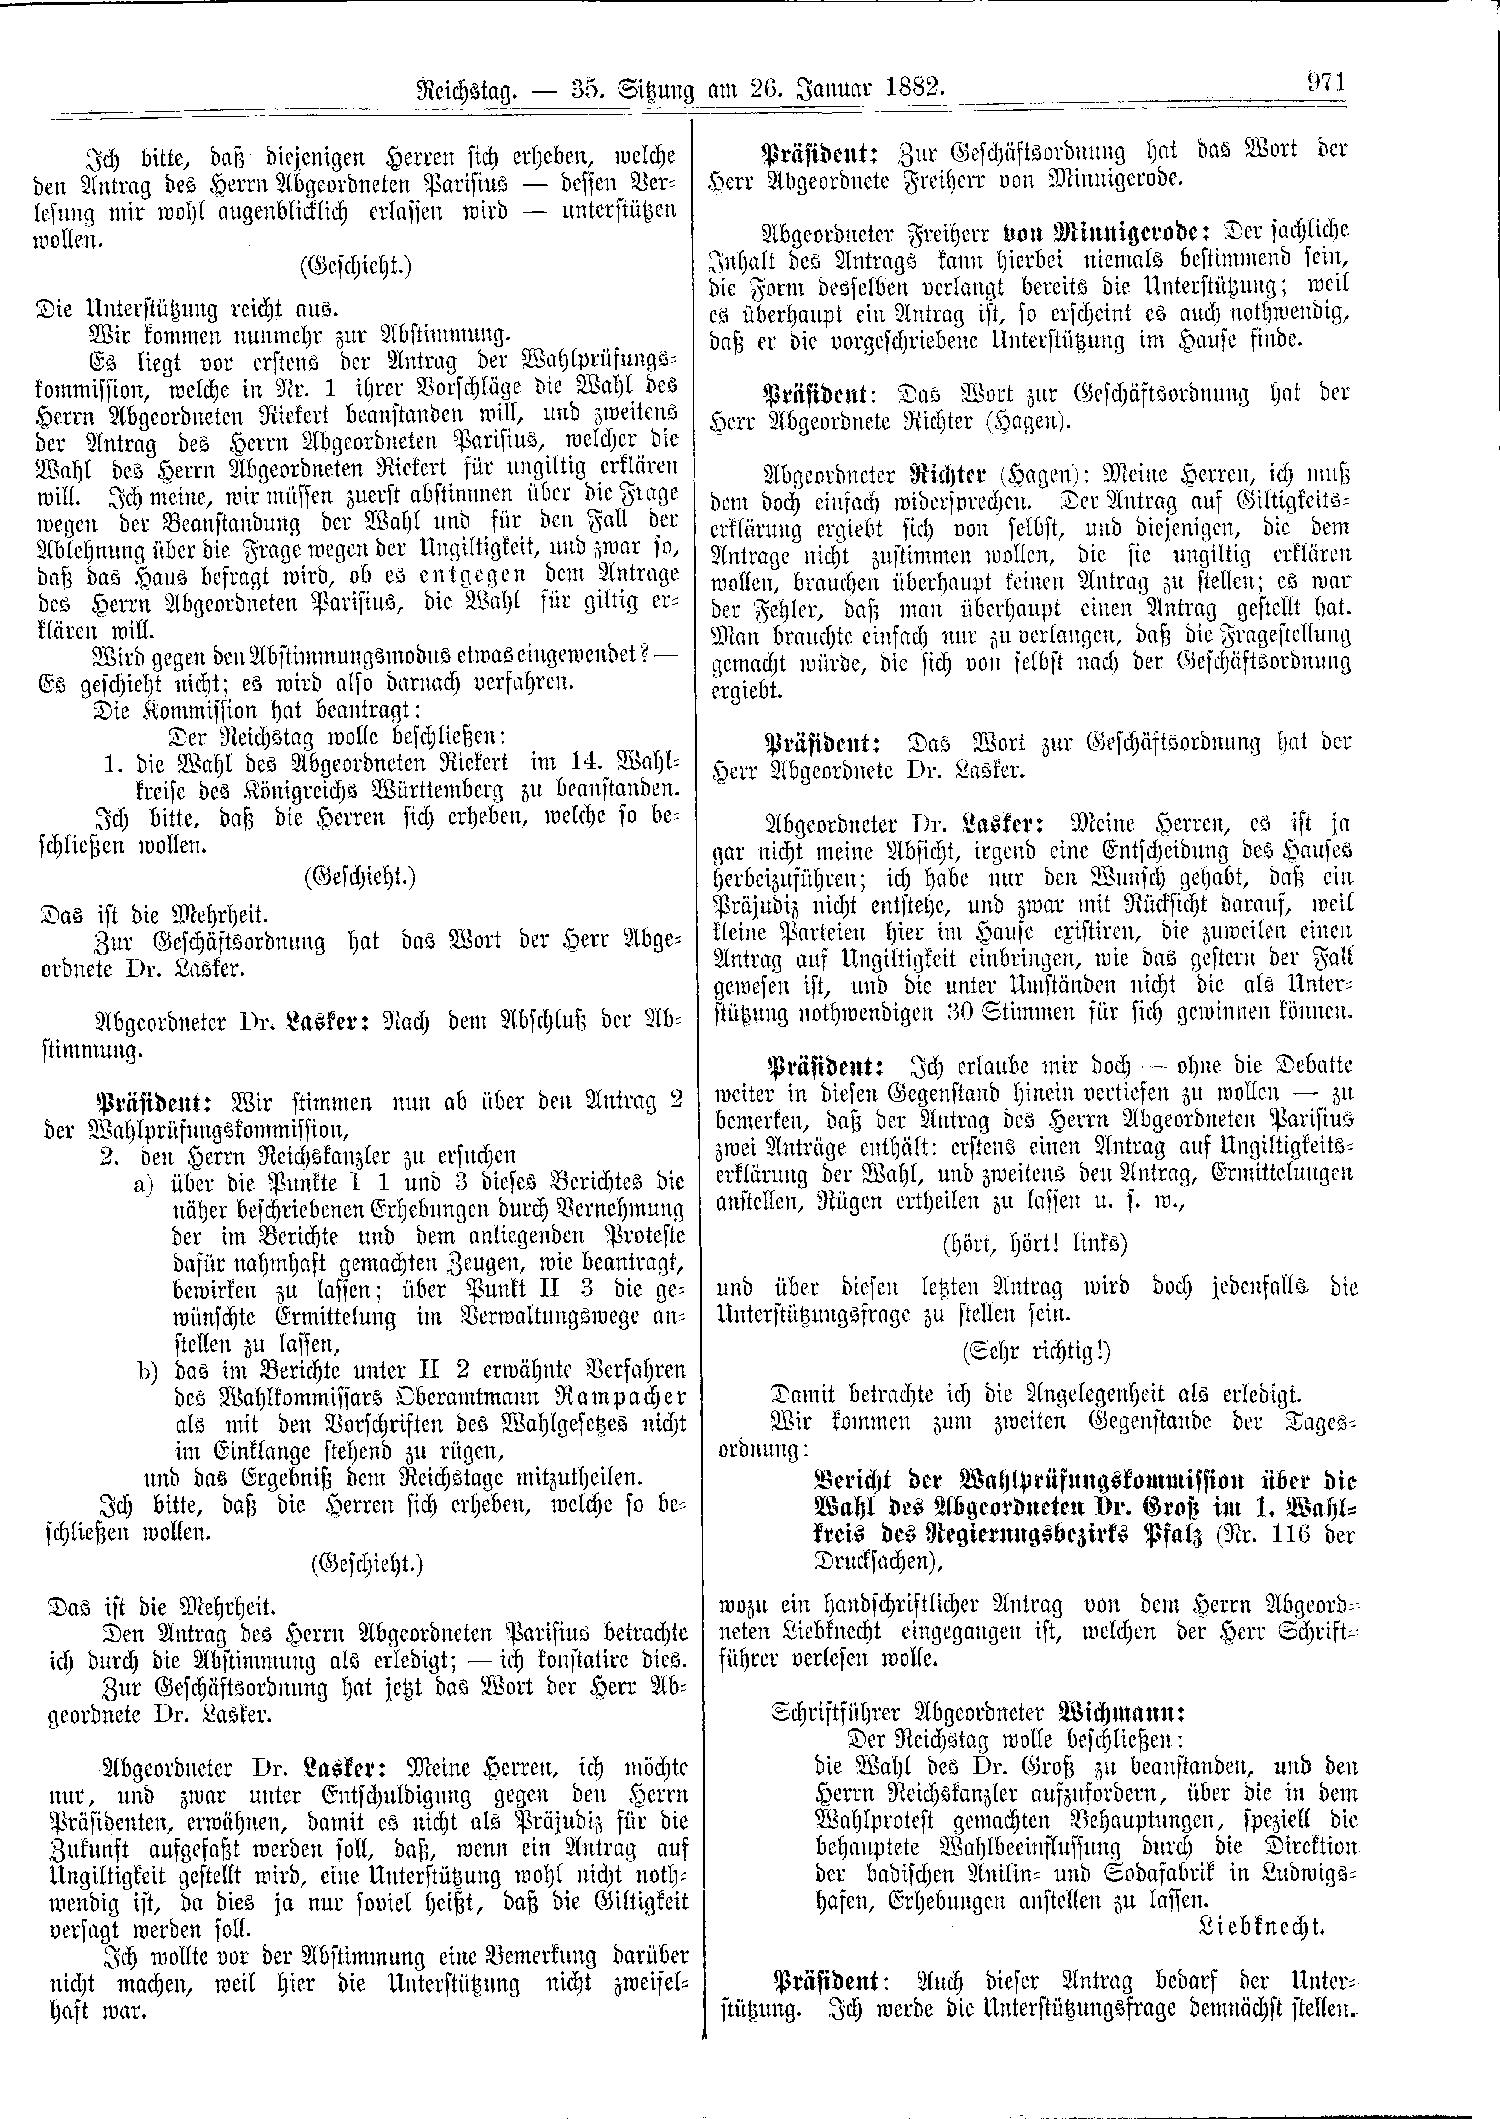 Scan of page 971